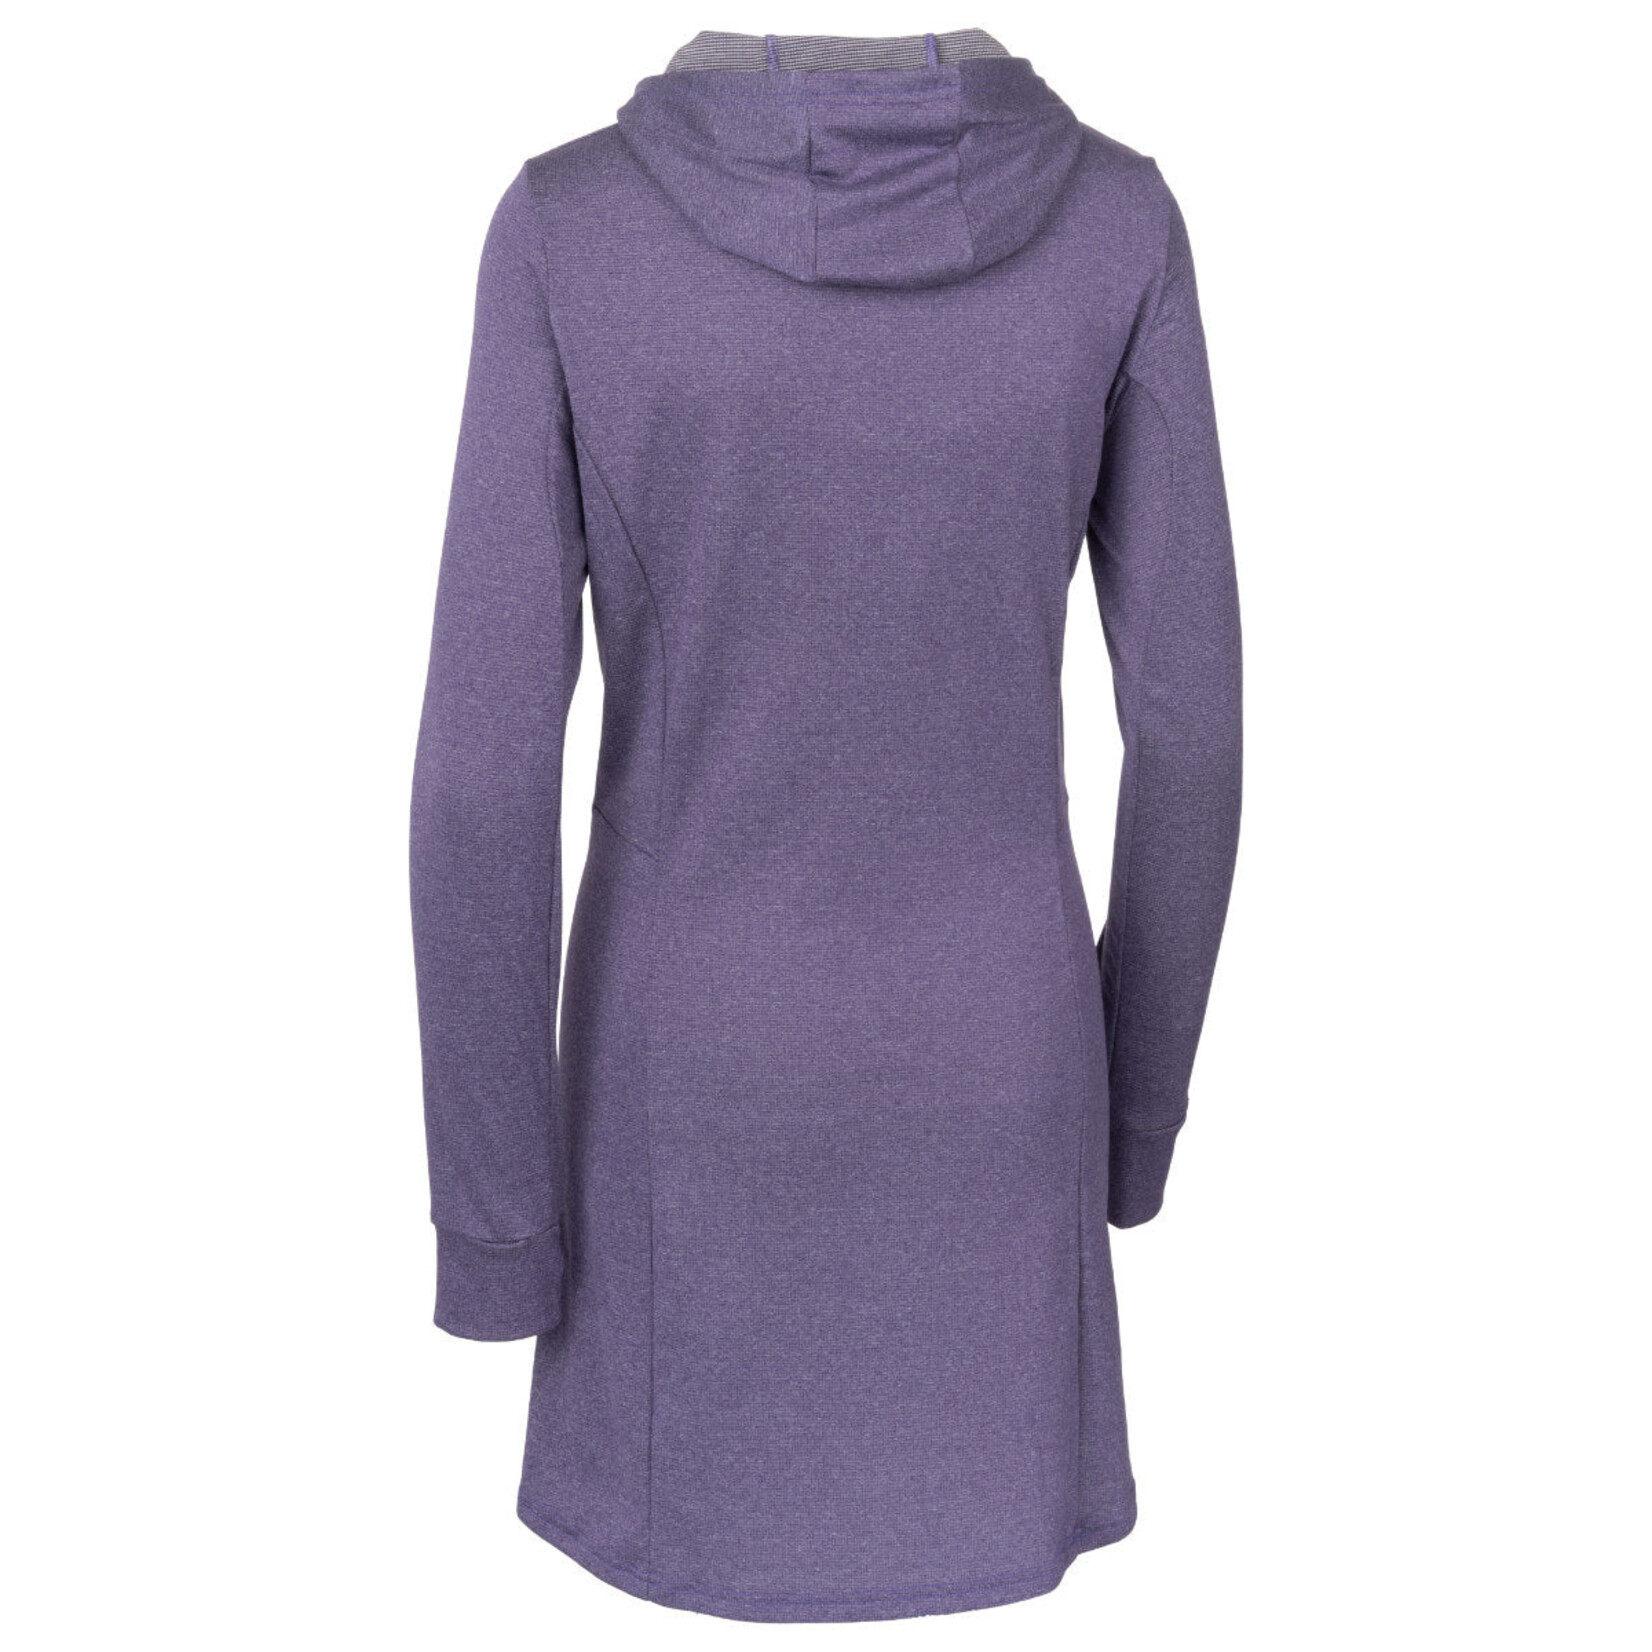 Immersion Research Immersion Research Women's Lightweight Power Wool® Sendress